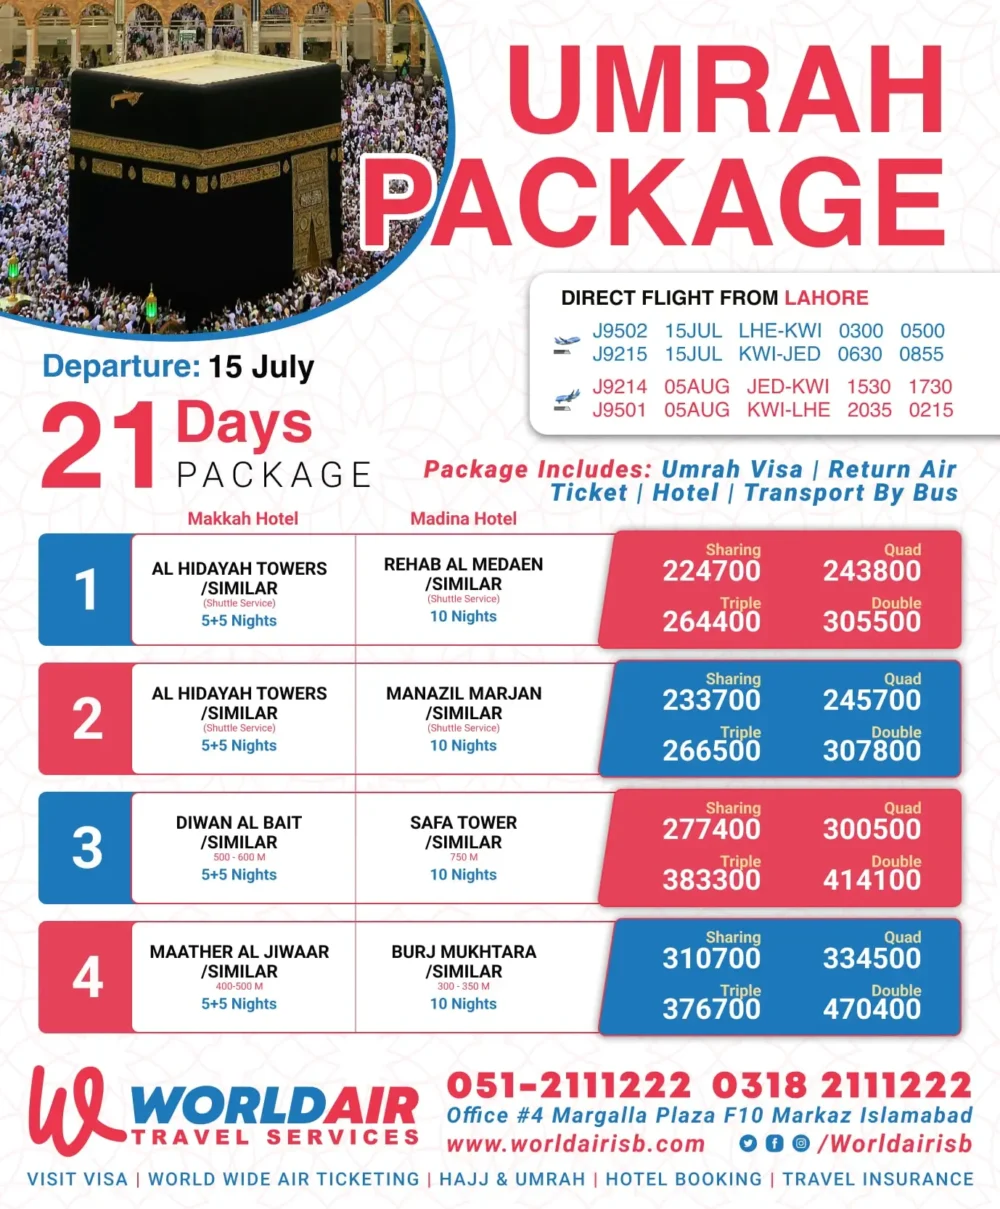 Umrah Package for 21 Days starting from 224700. Departure 15th July with 4 different Packages by world air travel services Islamabad with different hotels.